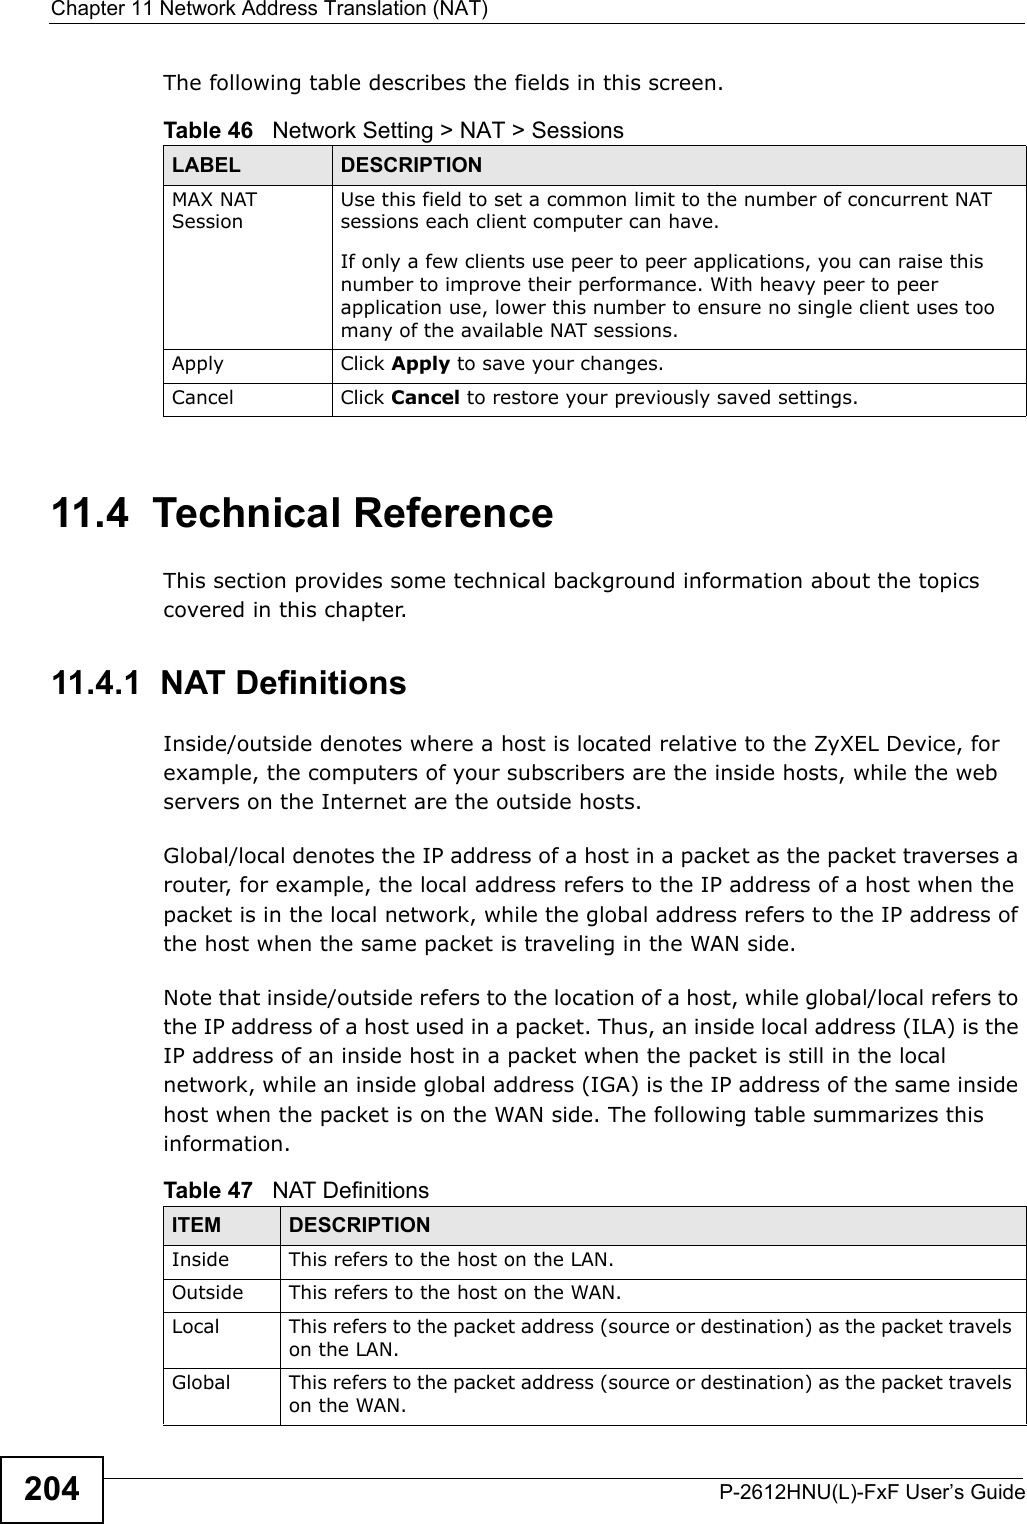 Chapter 11 Network Address Translation (NAT)P-2612HNU(L)-FxF User’s Guide204The following table describes the fields in this screen.11.4  Technical ReferenceThis section provides some technical background information about the topics covered in this chapter.11.4.1  NAT DefinitionsInside/outside denotes where a host is located relative to the ZyXEL Device, for example, the computers of your subscribers are the inside hosts, while the web servers on the Internet are the outside hosts. Global/local denotes the IP address of a host in a packet as the packet traverses a router, for example, the local address refers to the IP address of a host when the packet is in the local network, while the global address refers to the IP address of the host when the same packet is traveling in the WAN side.Note that inside/outside refers to the location of a host, while global/local refers tothe IP address of a host used in a packet. Thus, an inside local address (ILA) is the IP address of an inside host in a packet when the packet is still in the local network, while an inside global address (IGA) is the IP address of the same insidehost when the packet is on the WAN side. The following table summarizes this information.Table 46   Network Setting &gt; NAT &gt; SessionsLABEL DESCRIPTIONMAX NATSessionUse this field to set a common limit to the number of concurrent NAT sessions each client computer can have.If only a few clients use peer to peer applications, you can raise this number to improve their performance. With heavy peer to peer application use, lower this number to ensure no single client uses too many of the available NAT sessions.Apply Click Apply to save your changes.Cancel Click Cancel to restore your previously saved settings.Table 47   NAT DefinitionsITEM DESCRIPTIONInside This refers to the host on the LAN.Outside This refers to the host on the WAN.Local This refers to the packet address (source or destination) as the packet travels on the LAN.Global This refers to the packet address (source or destination) as the packet travels on the WAN.